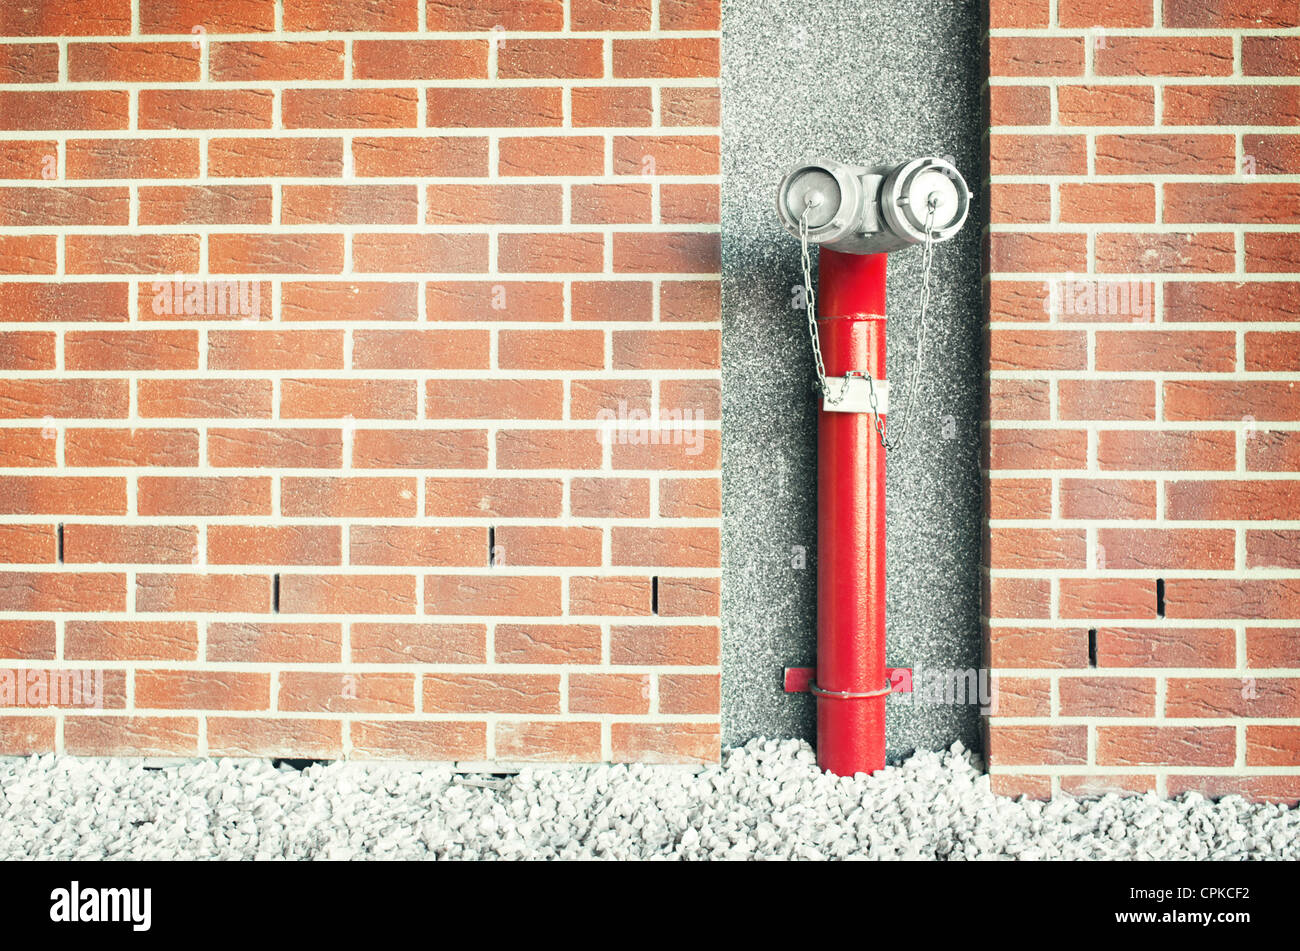 Red Fire Hydrant in der Wand. Stockfoto